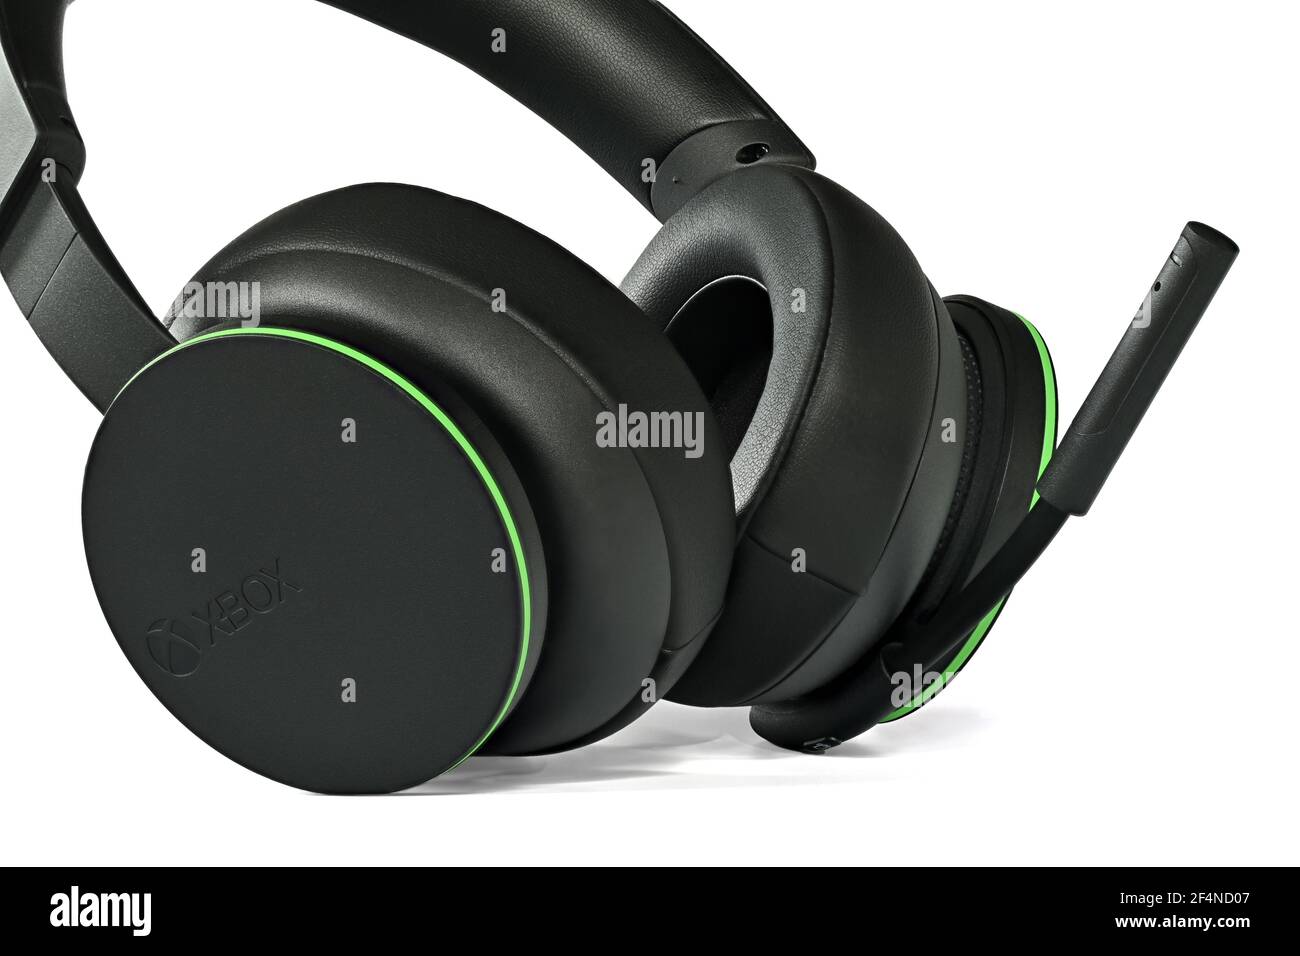 Brand new Microsoft Xbox Wireless Headset 2021. Direct pairing to console, wireless connection. Gaming accessory. Over-Ear headphones. Stock Photo